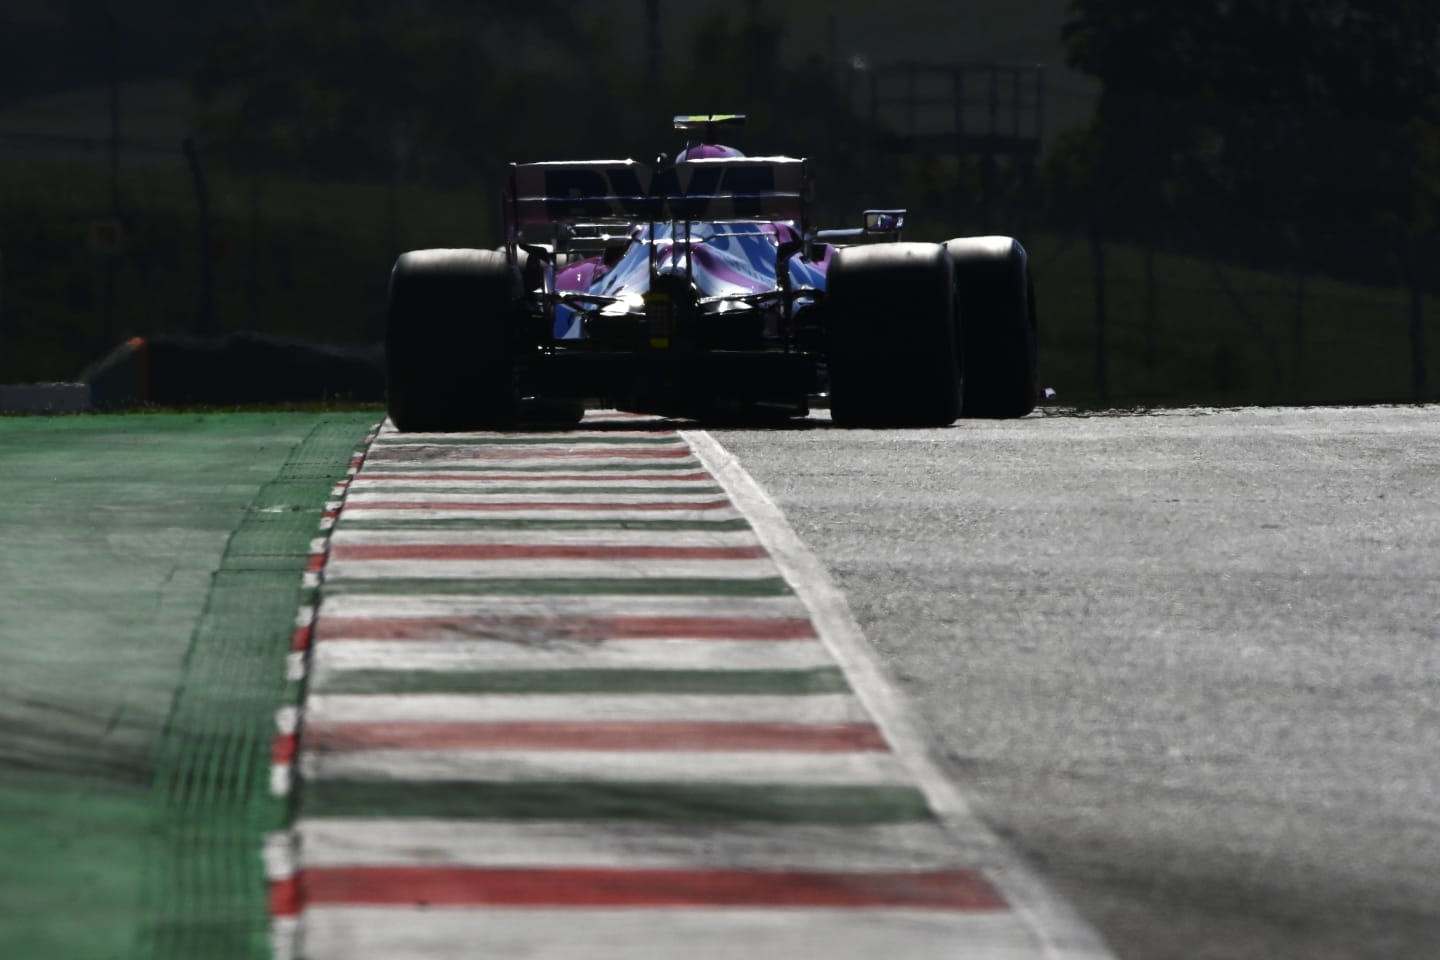 SCARPERIA, ITALY - SEPTEMBER 12: Lance Stroll of Canada driving the (18) Racing Point RP20 Mercedes on track during qualifying for the F1 Grand Prix of Tuscany at Mugello Circuit on September 12, 2020 in Scarperia, Italy. (Photo by Rudy Carezzevoli/Getty Images)